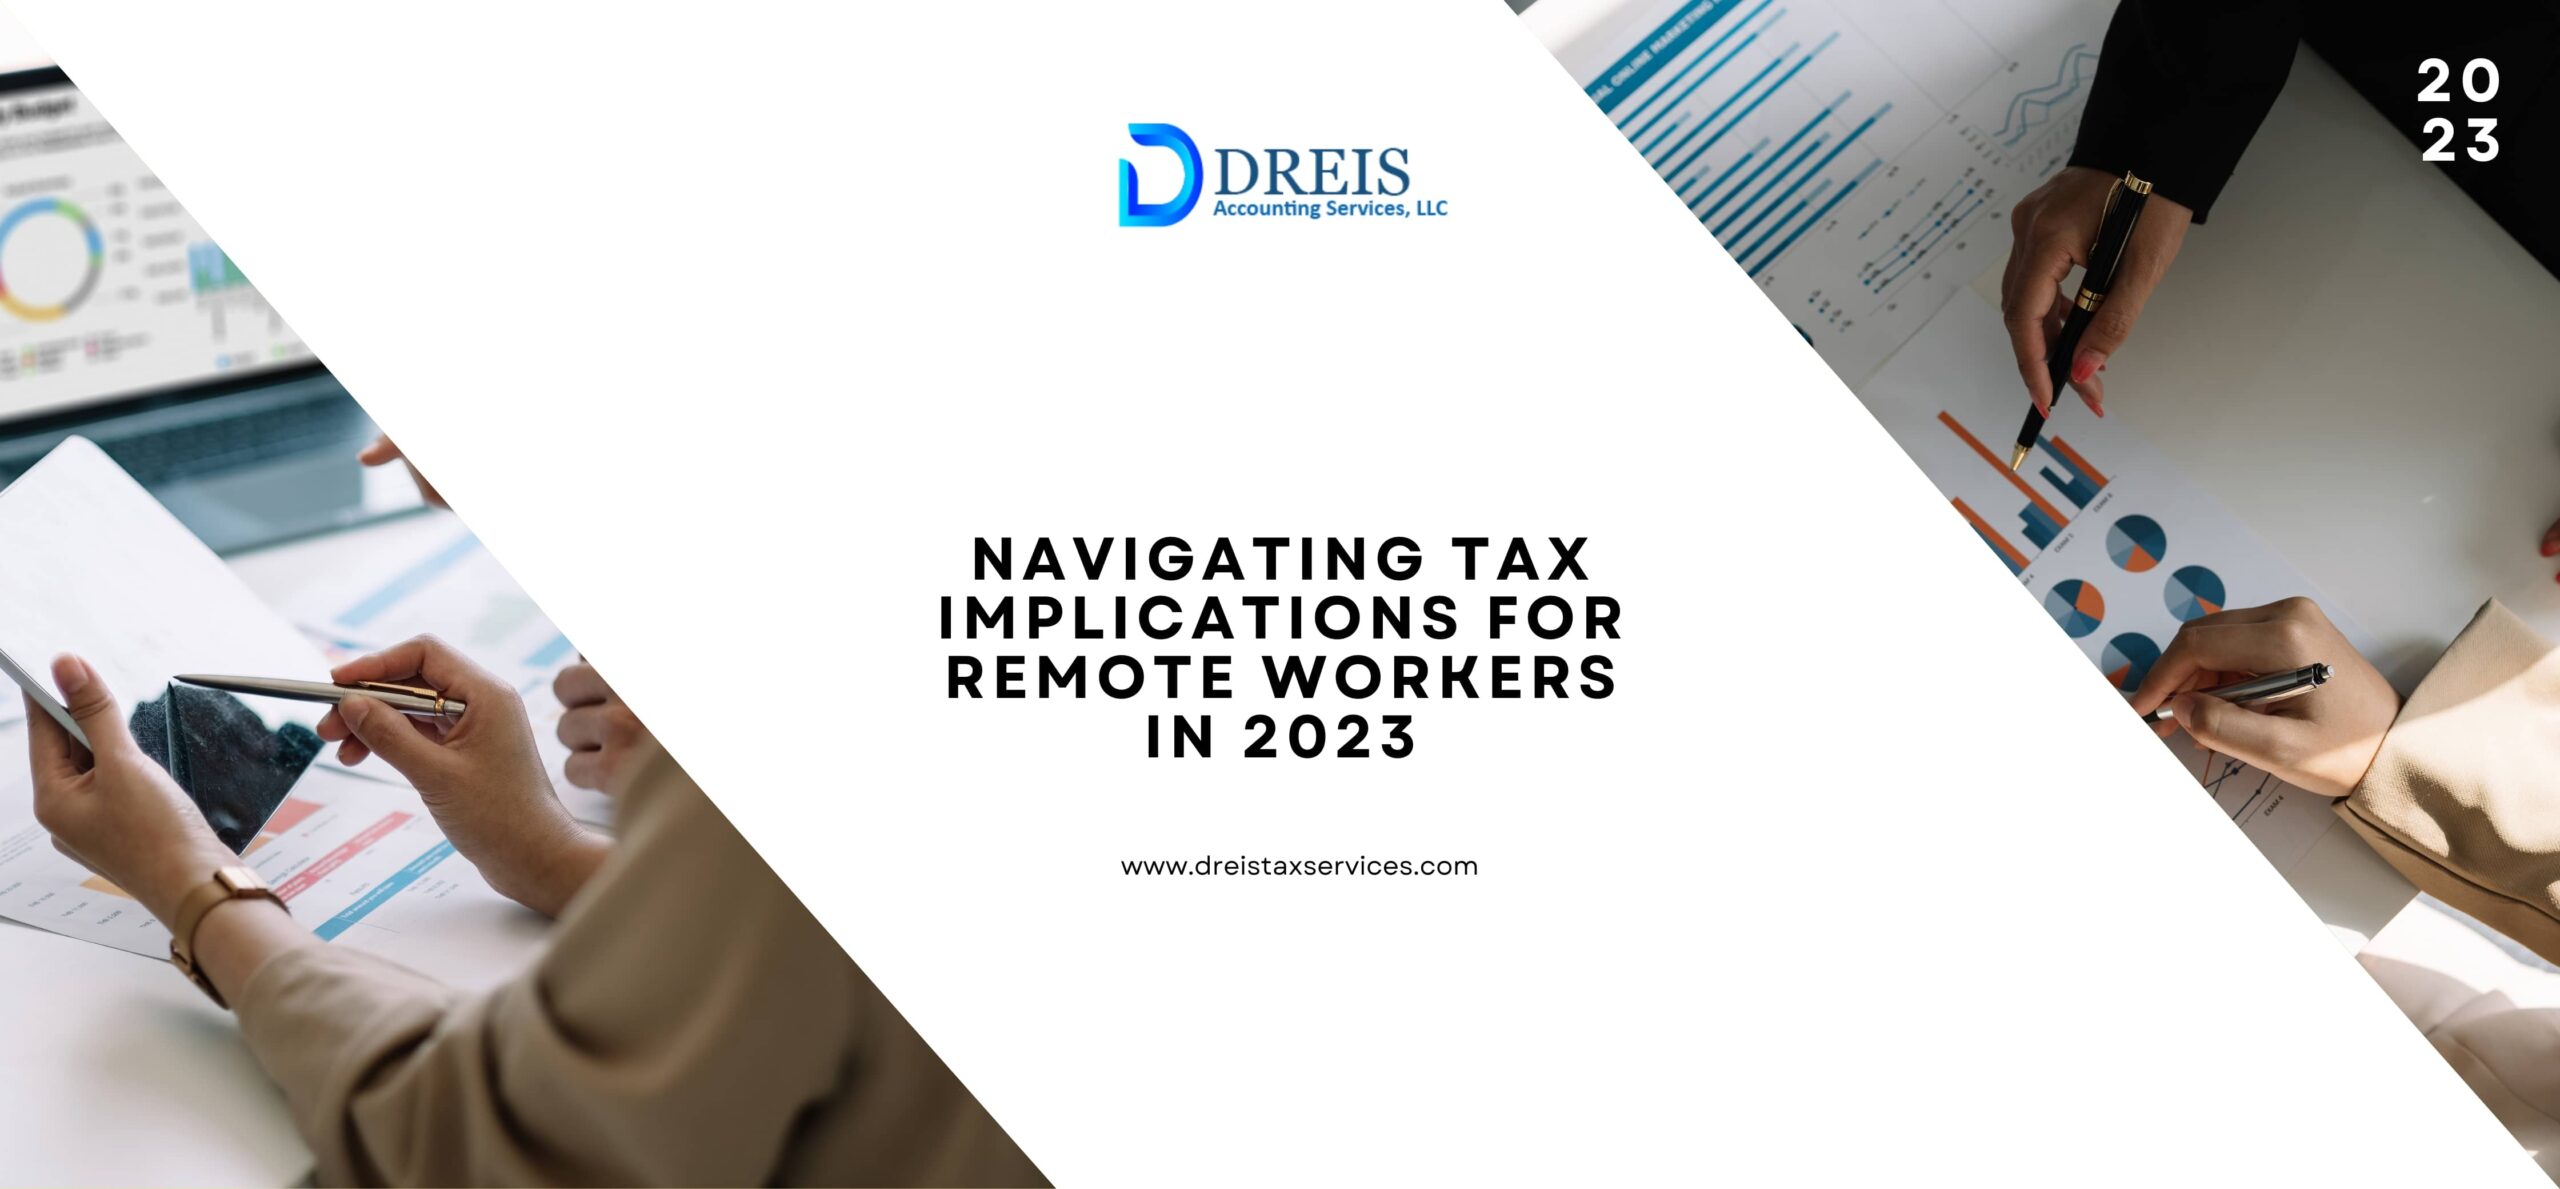 Navigating Tax Implications for Remote Workers in 2023